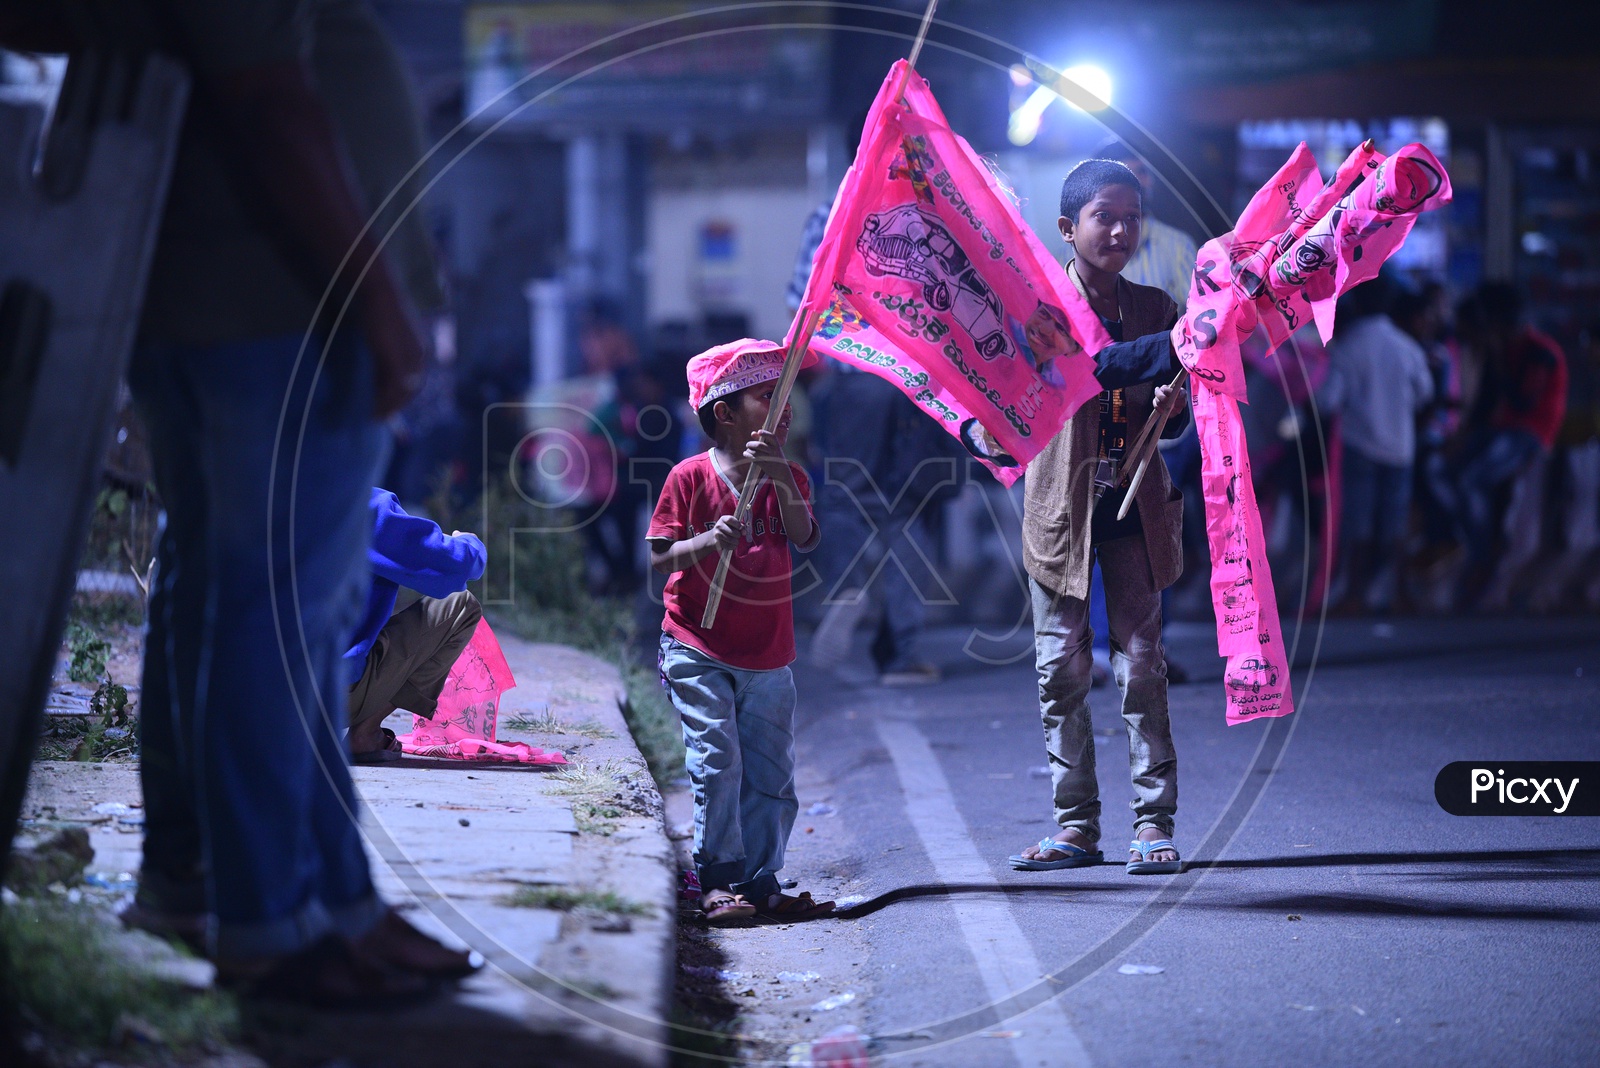 Children Waving TRS Party Flags During Election Campaign 2018